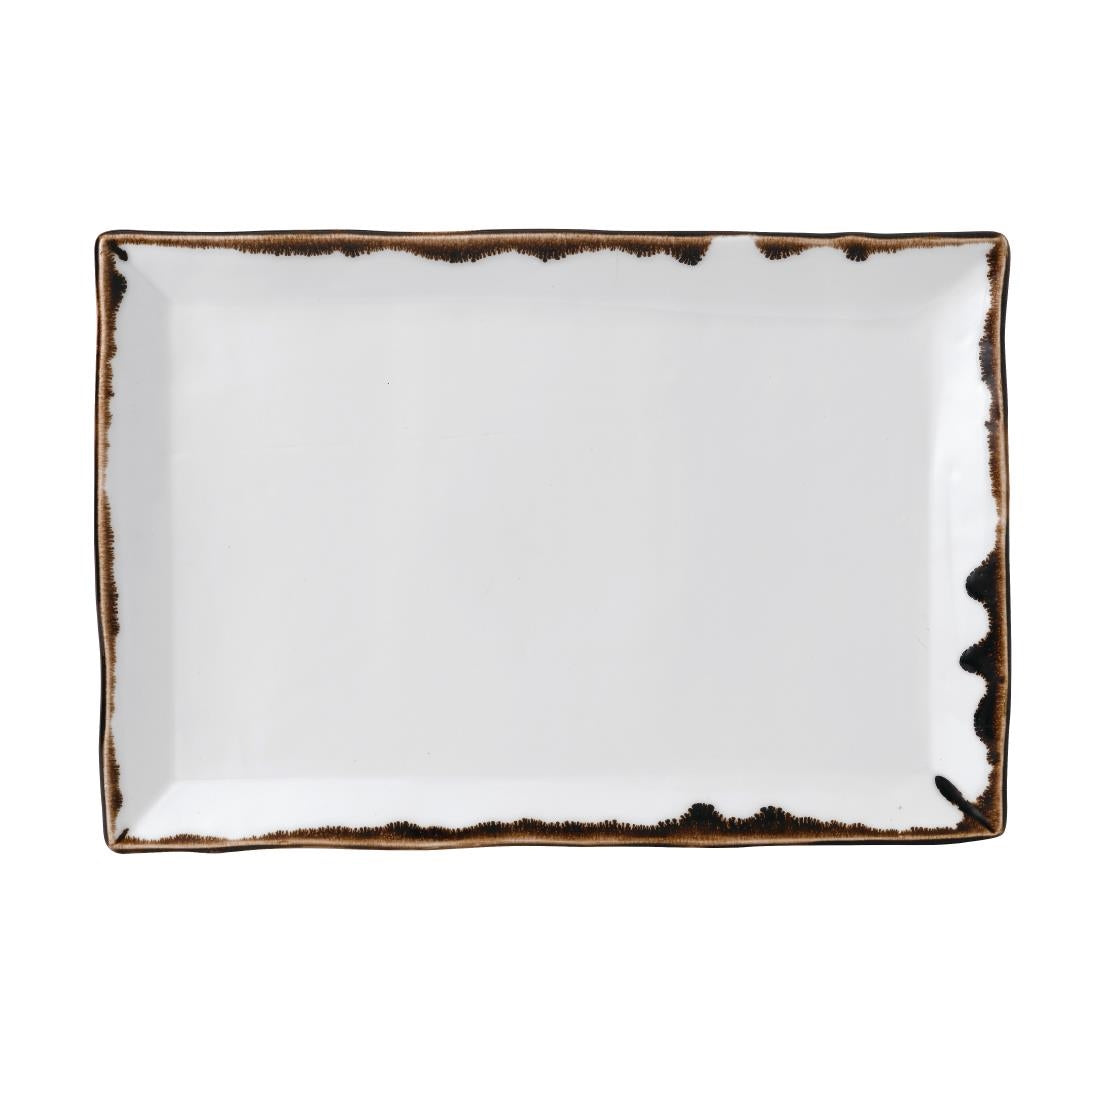 FC013 Dudson Harvest Rectangular Trays Natural 230 x 336mm (Pack of 6) JD Catering Equipment Solutions Ltd